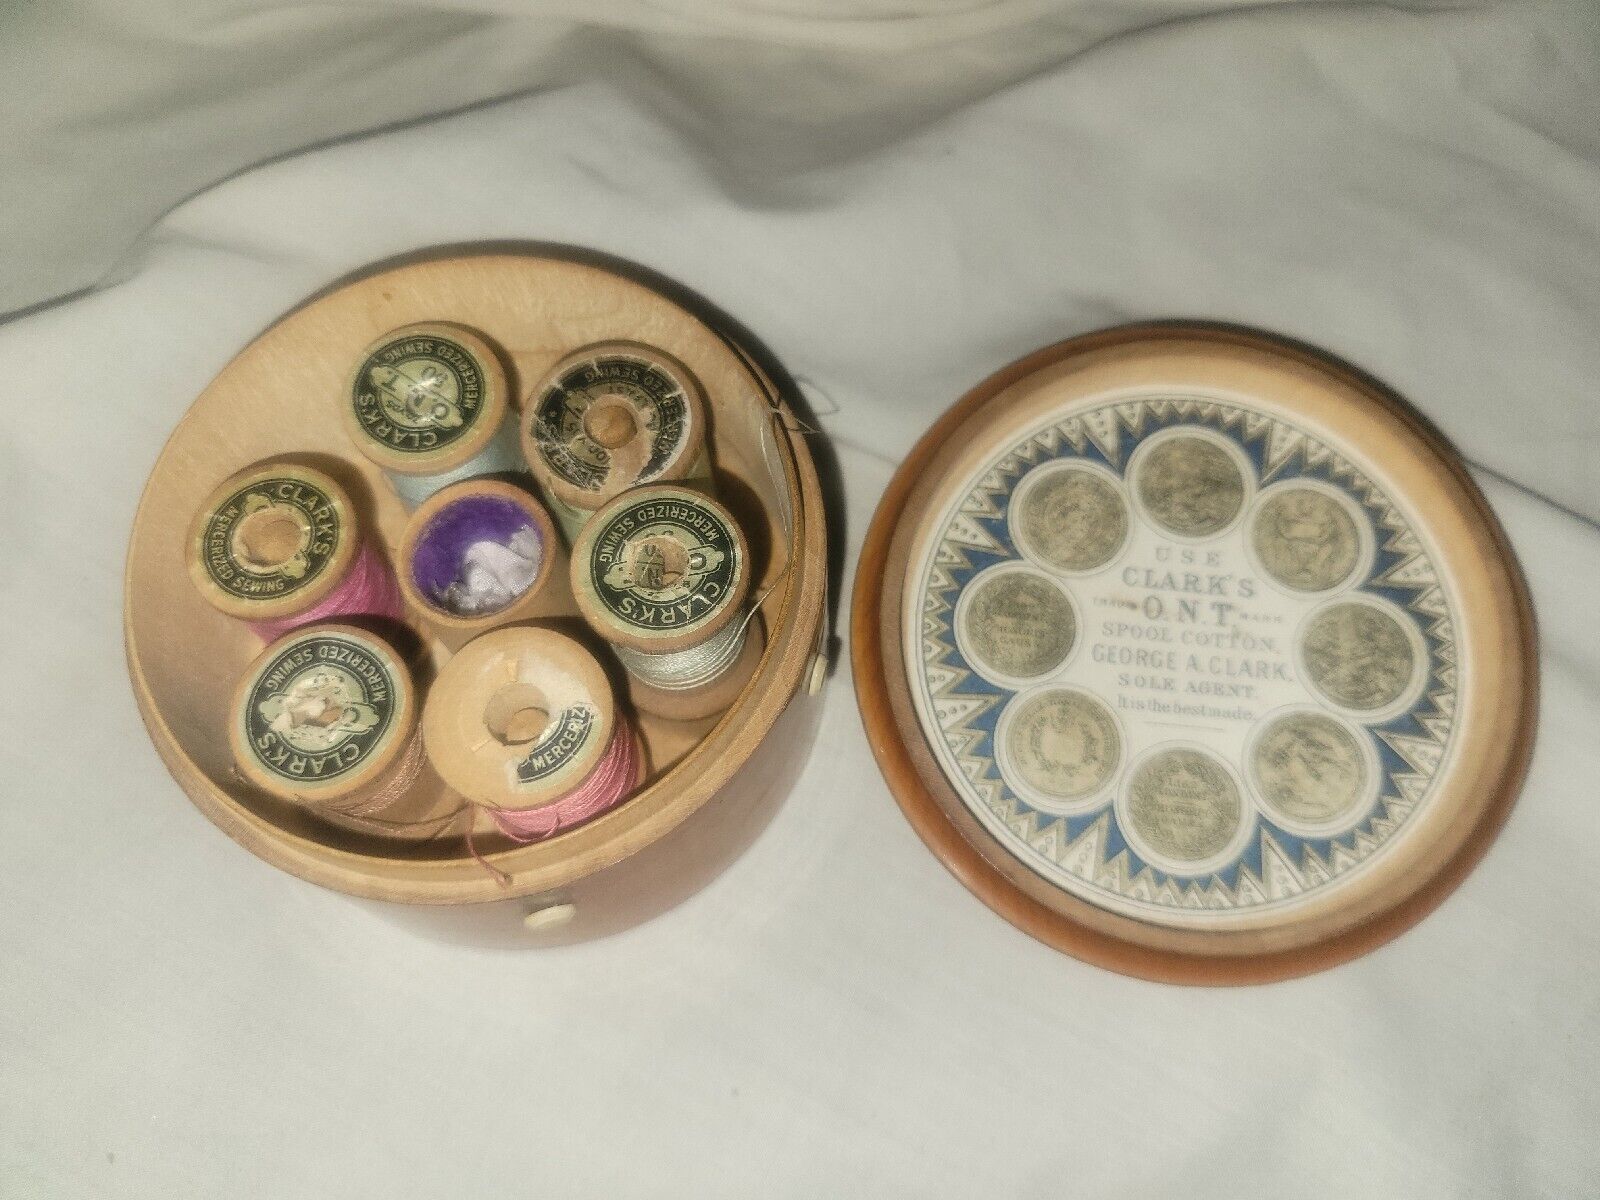   Rare Antique Mauchline Ware Sewing Spools Of Thread And Needle Holder ca 1880.